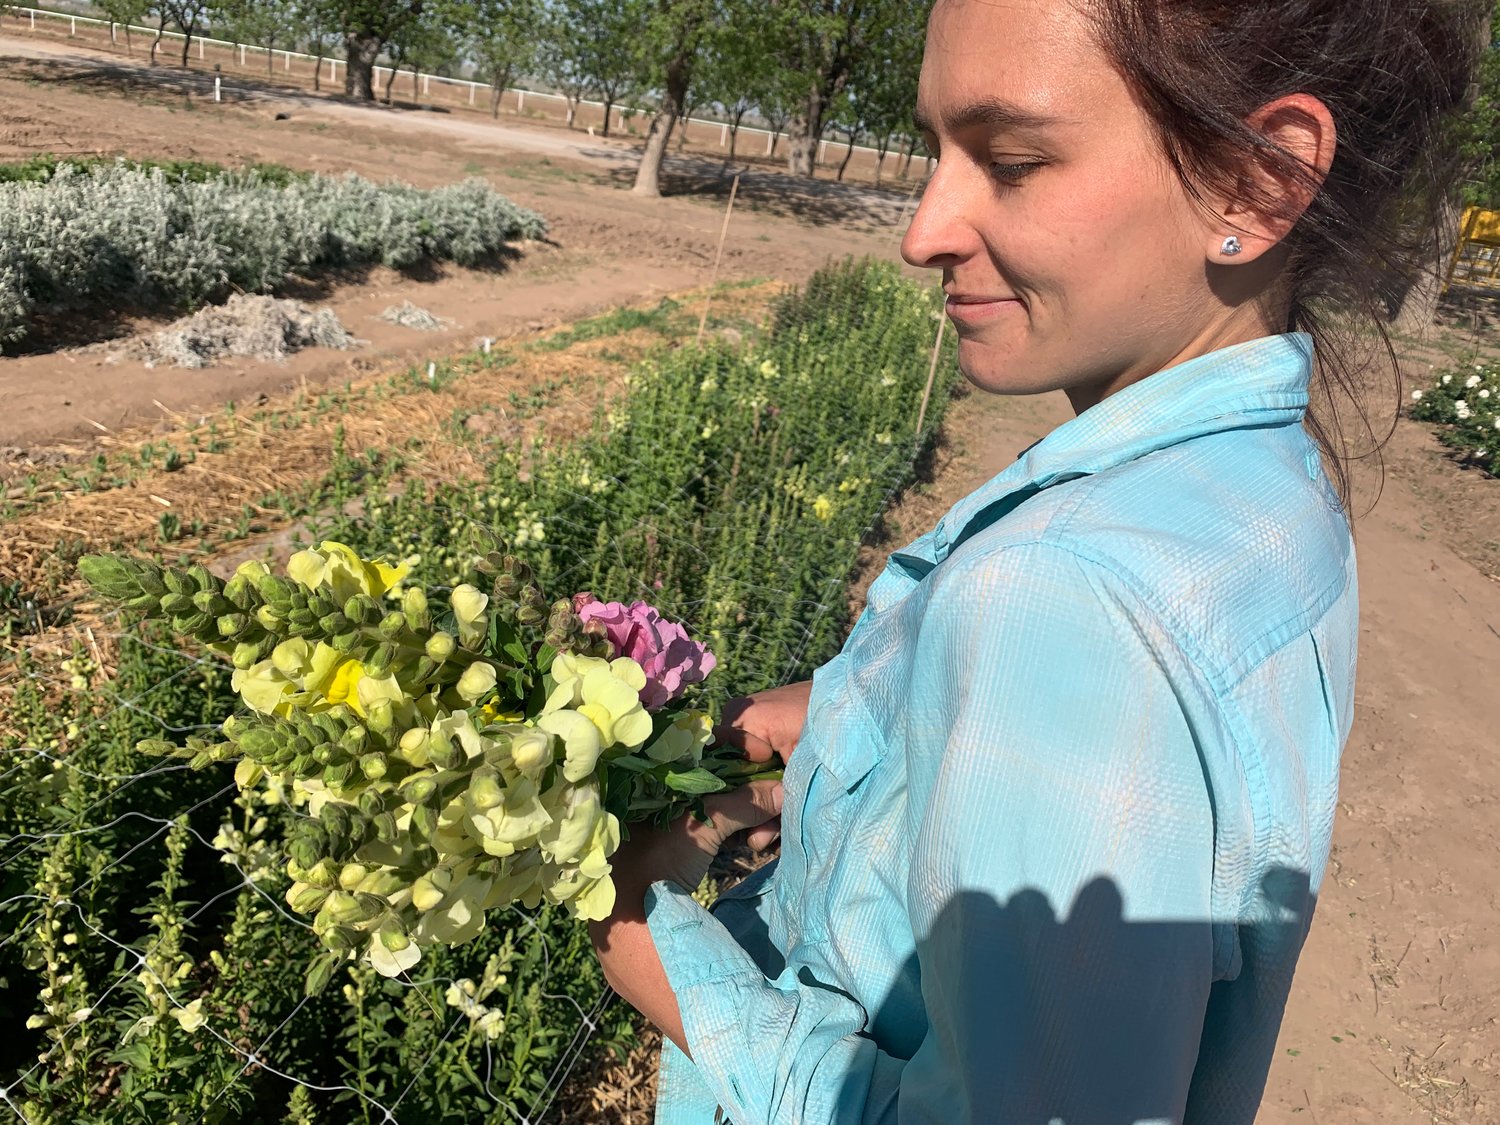 Susannah Calhoun with a recently harvested bunch of snapdragons.